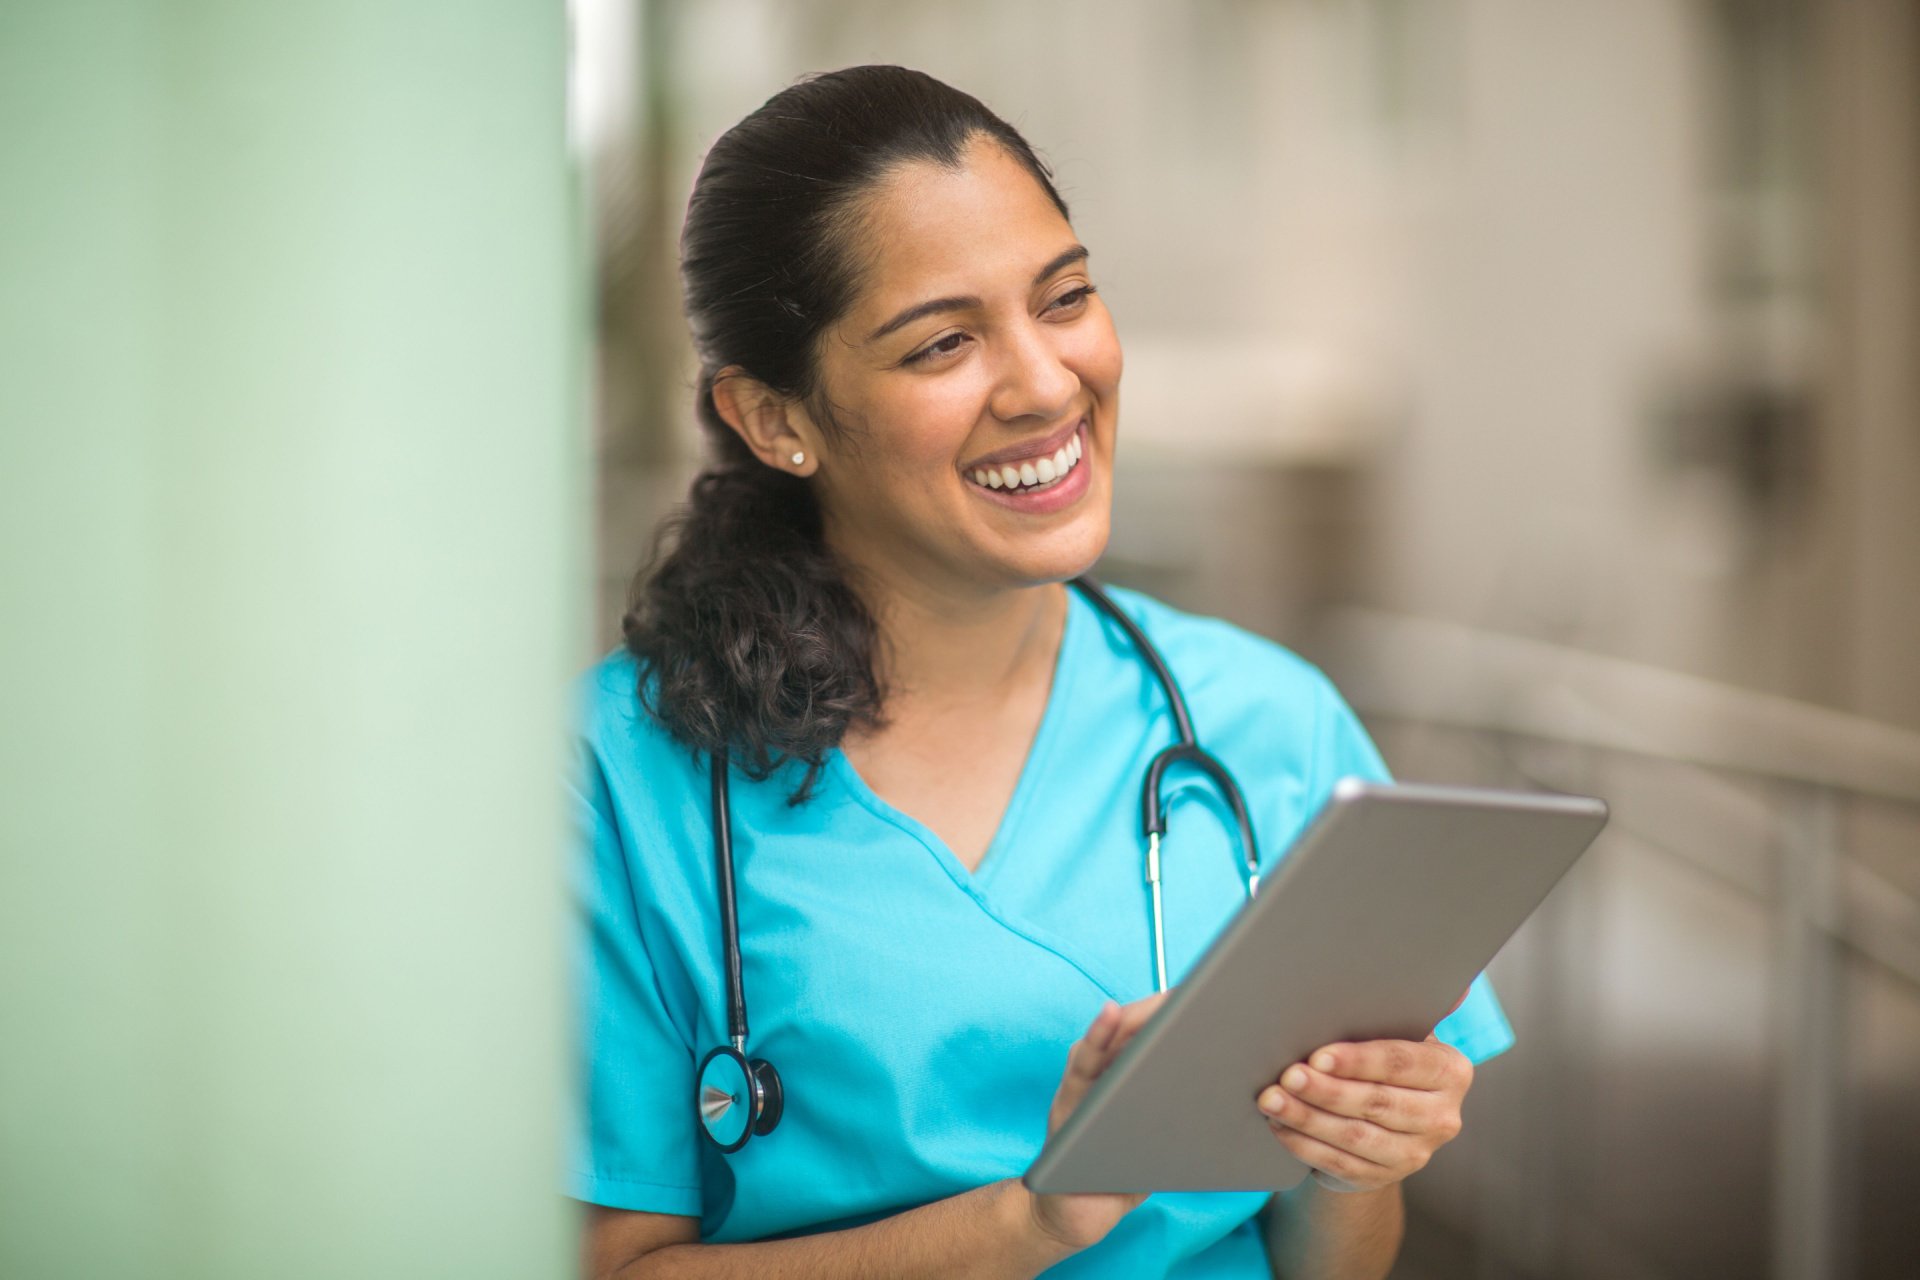 A nurse in a light blue outfit smiling whilst holding a grey clipboard